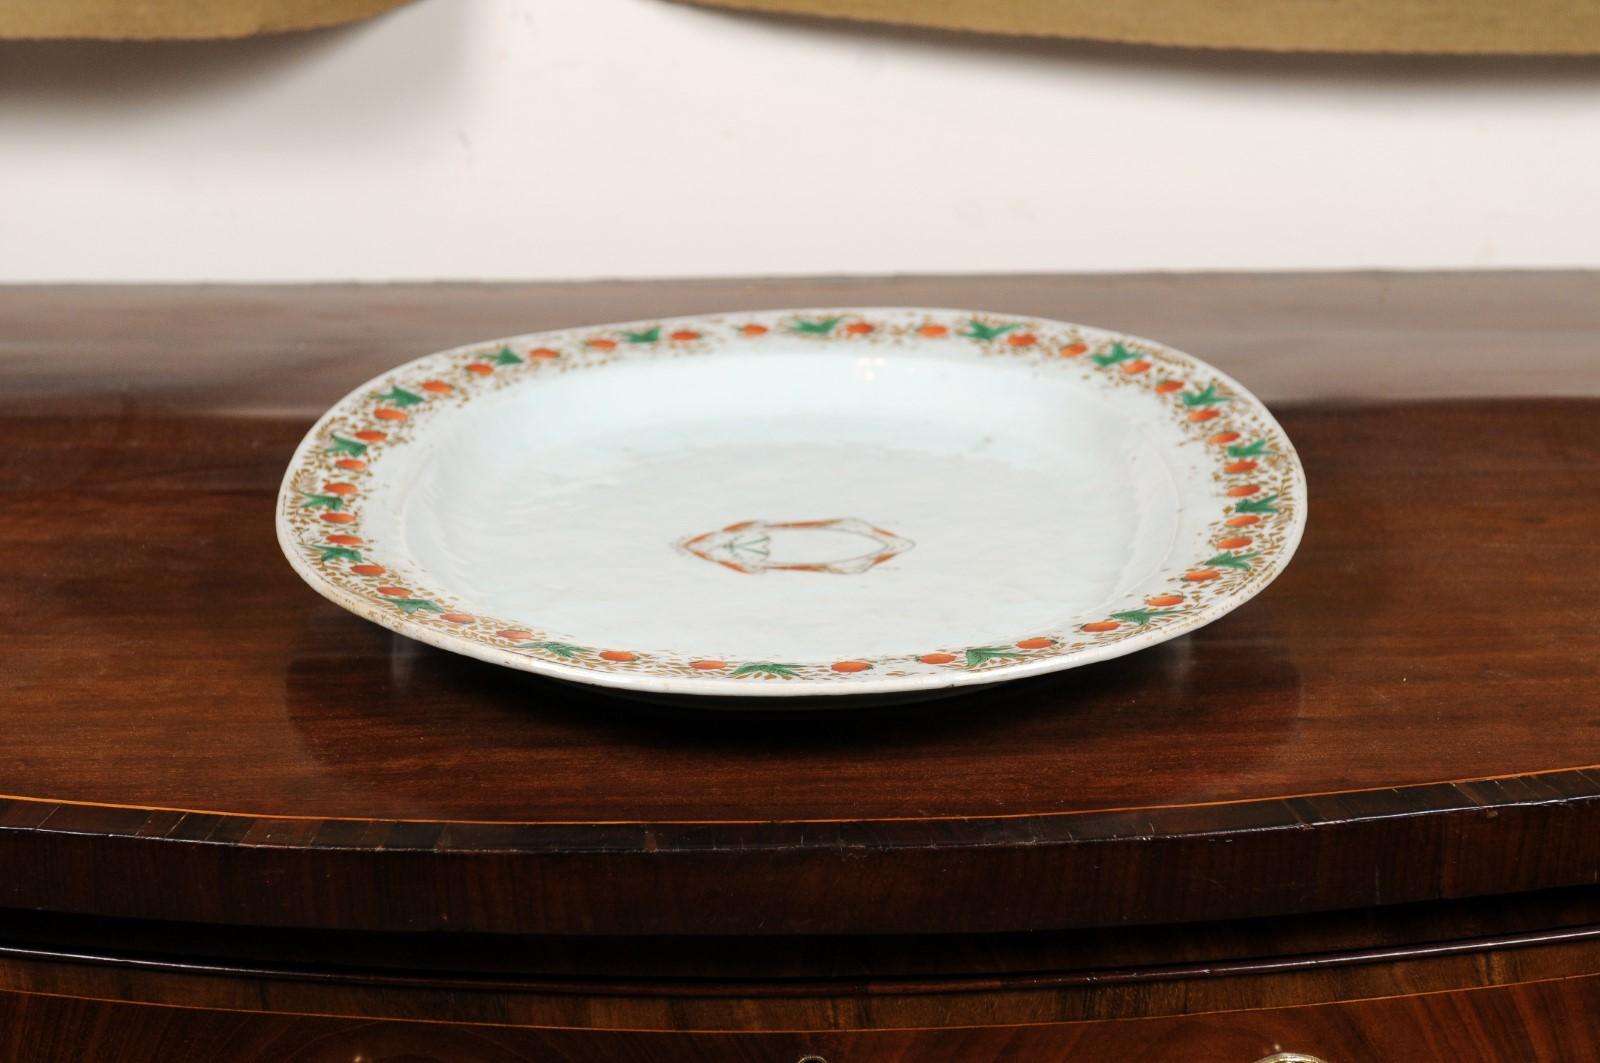 Chinese Export Armorial Porcelain Platter with Strawberry Pattern, 19th Century For Sale 10